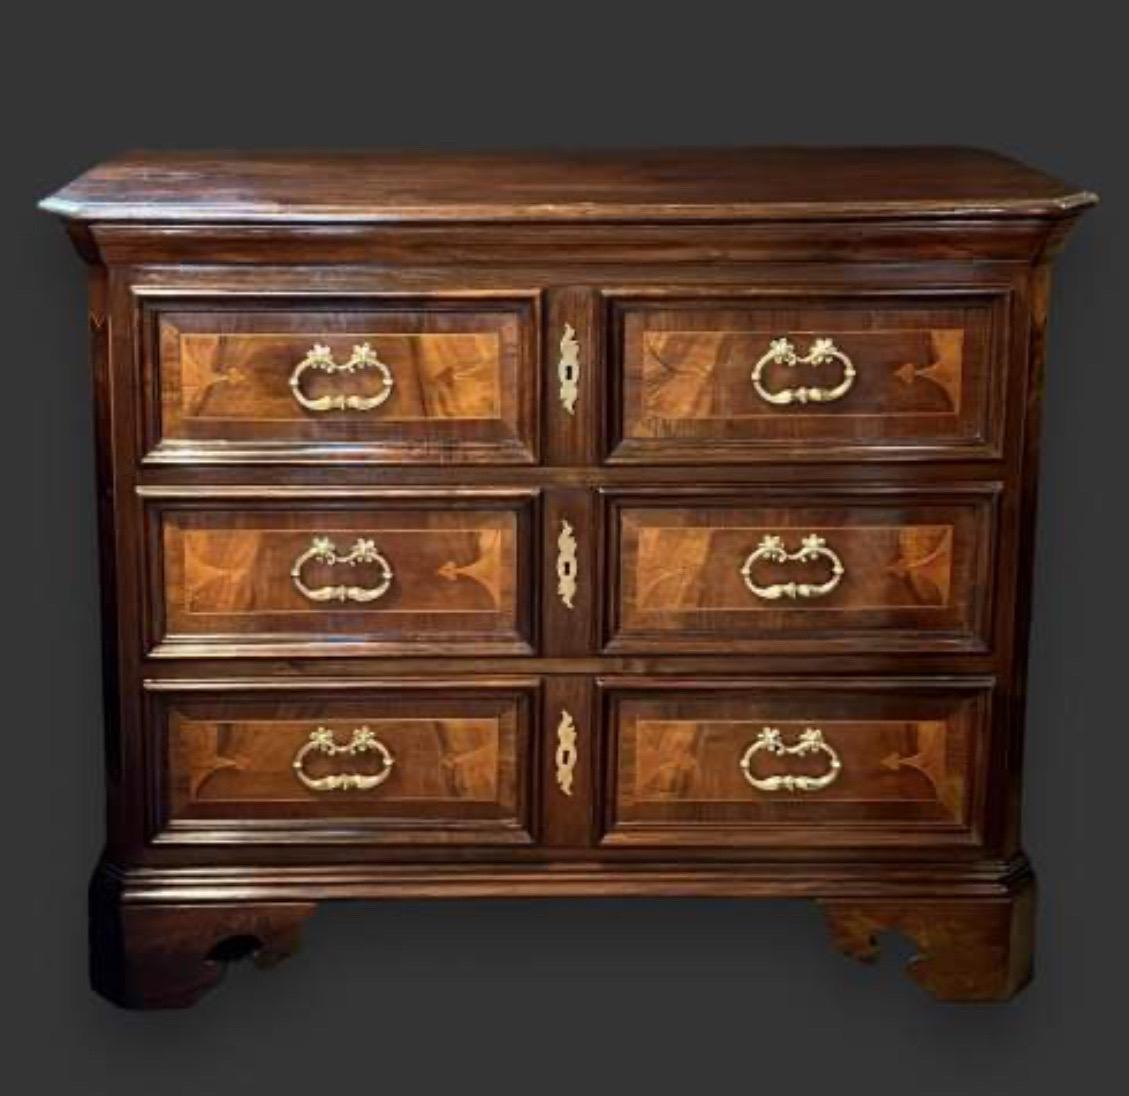  A Large 18th Century Northern Italian Chest of Drawers  For Sale 8